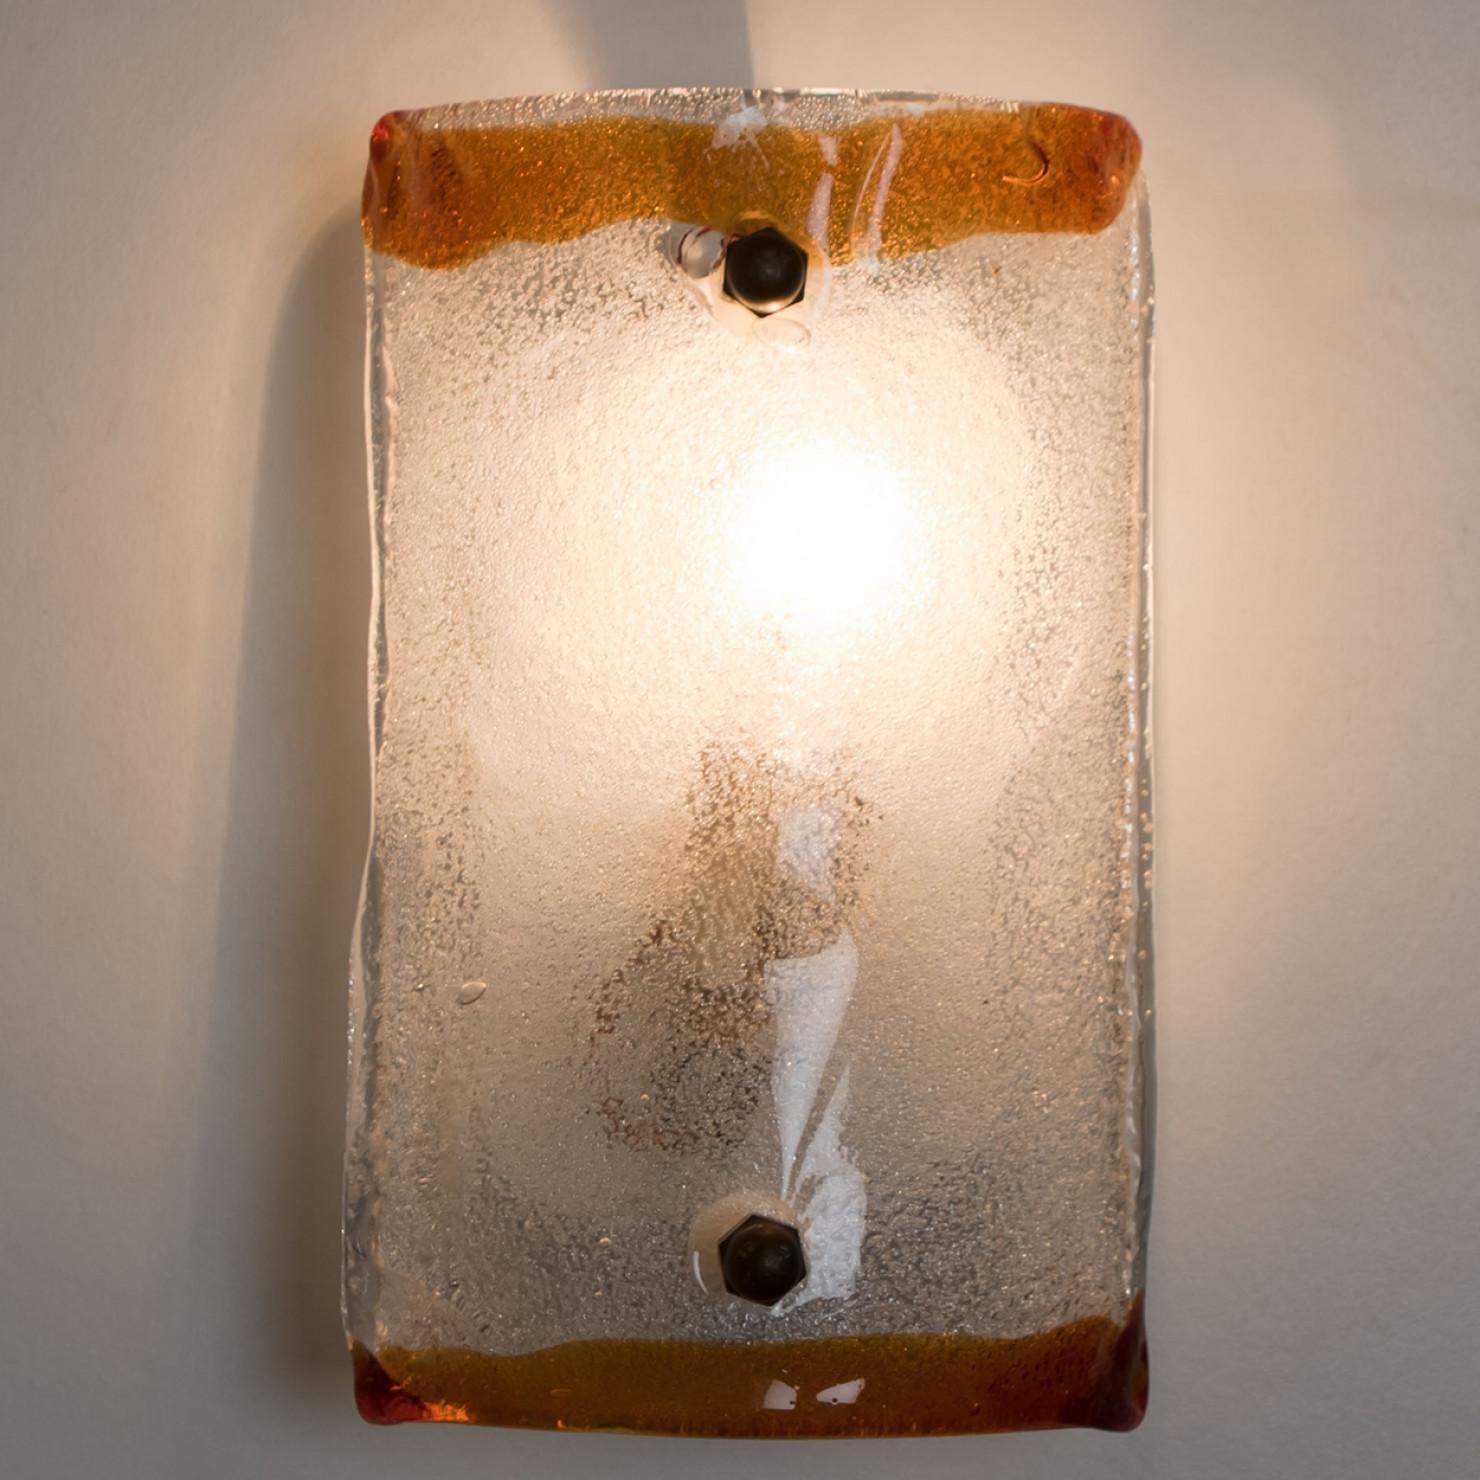 Beautiful rectangle wall light made by Carlo Nason. With a crystal clear glass plate, and brown edges, this beautiful piece made in thick handmade Murano glass creates a warm aesthetic.

Dimensions:
Height: 9.05